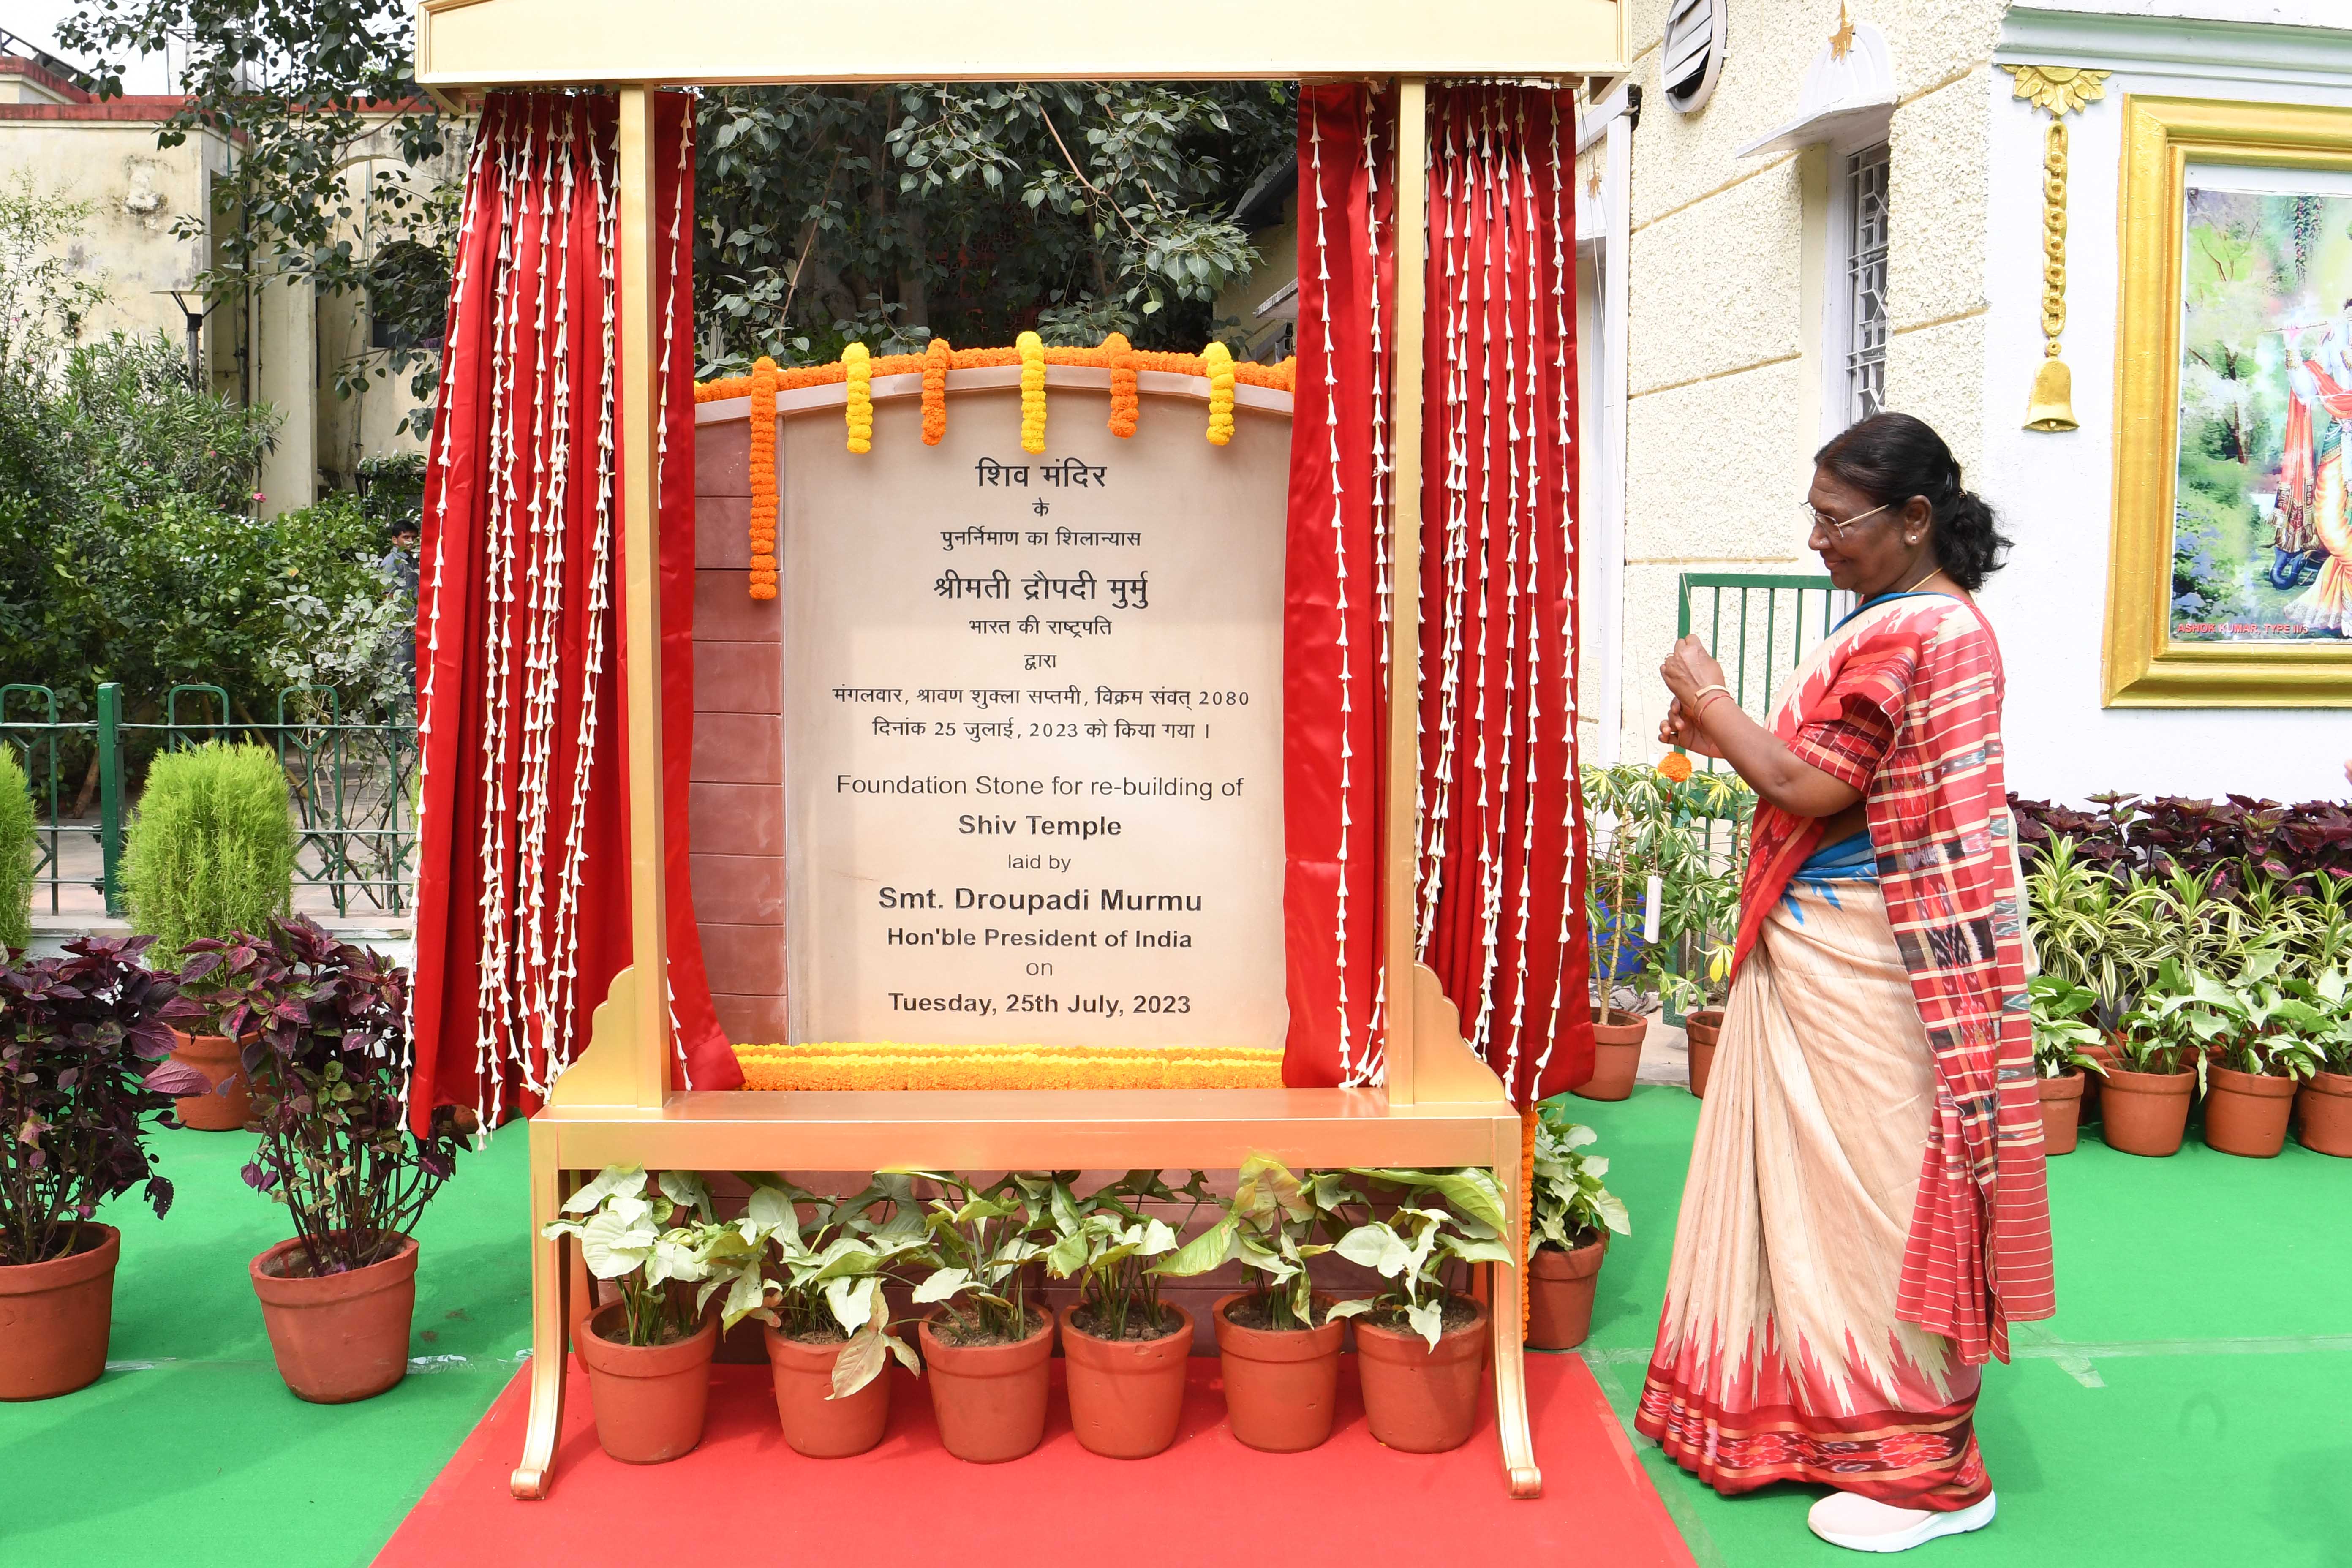 The President of India, Smt Droupadi Murmu Laid the foundation stone for redevelopment of Shiva Temple situated in the President’s Estate on July 25, 2023.